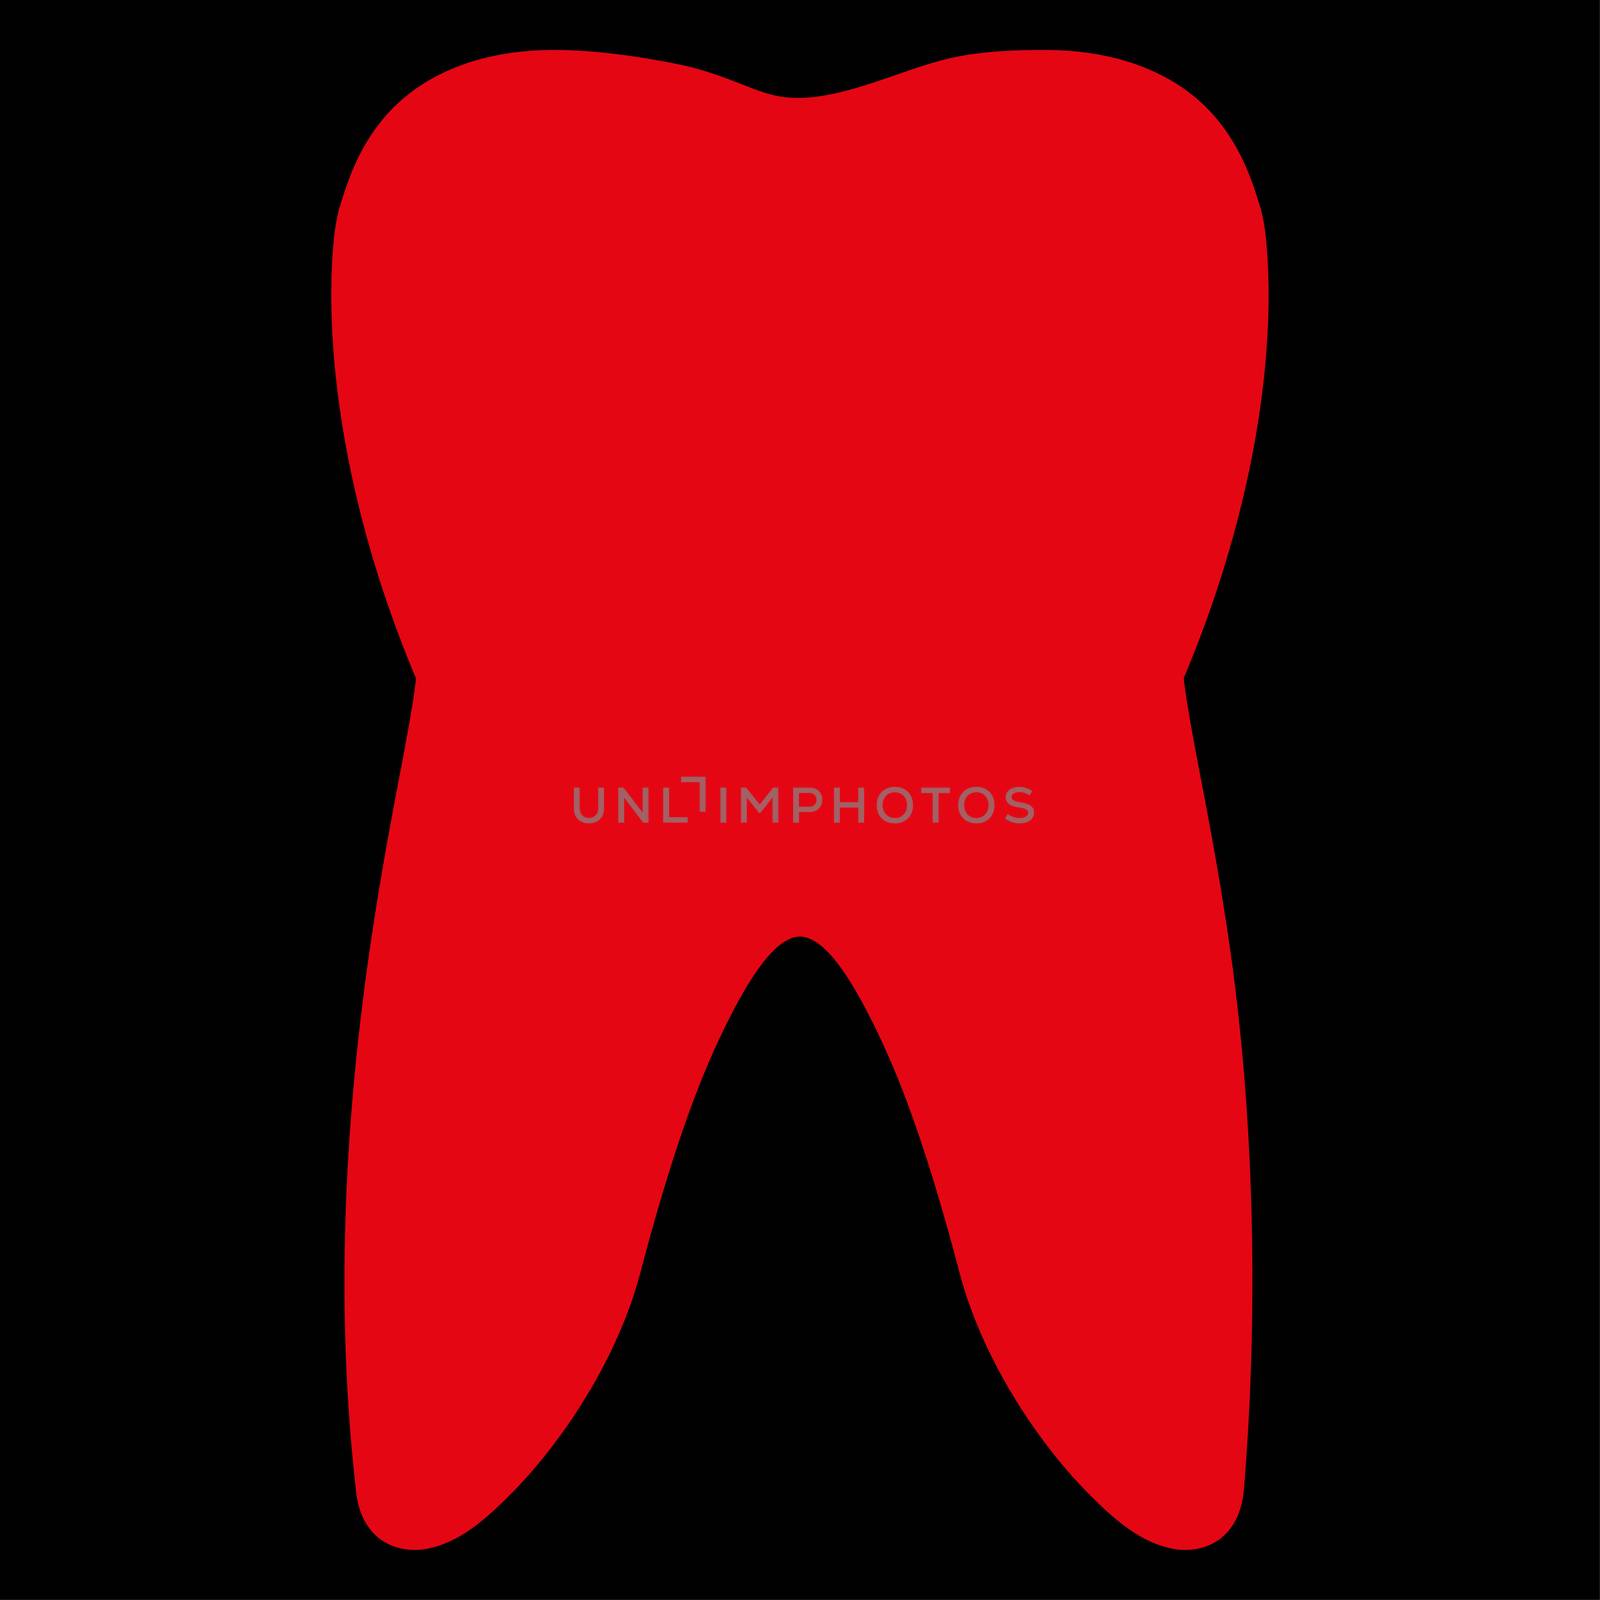 Tooth raster icon. Style is flat symbol, red color, rounded angles, black background.